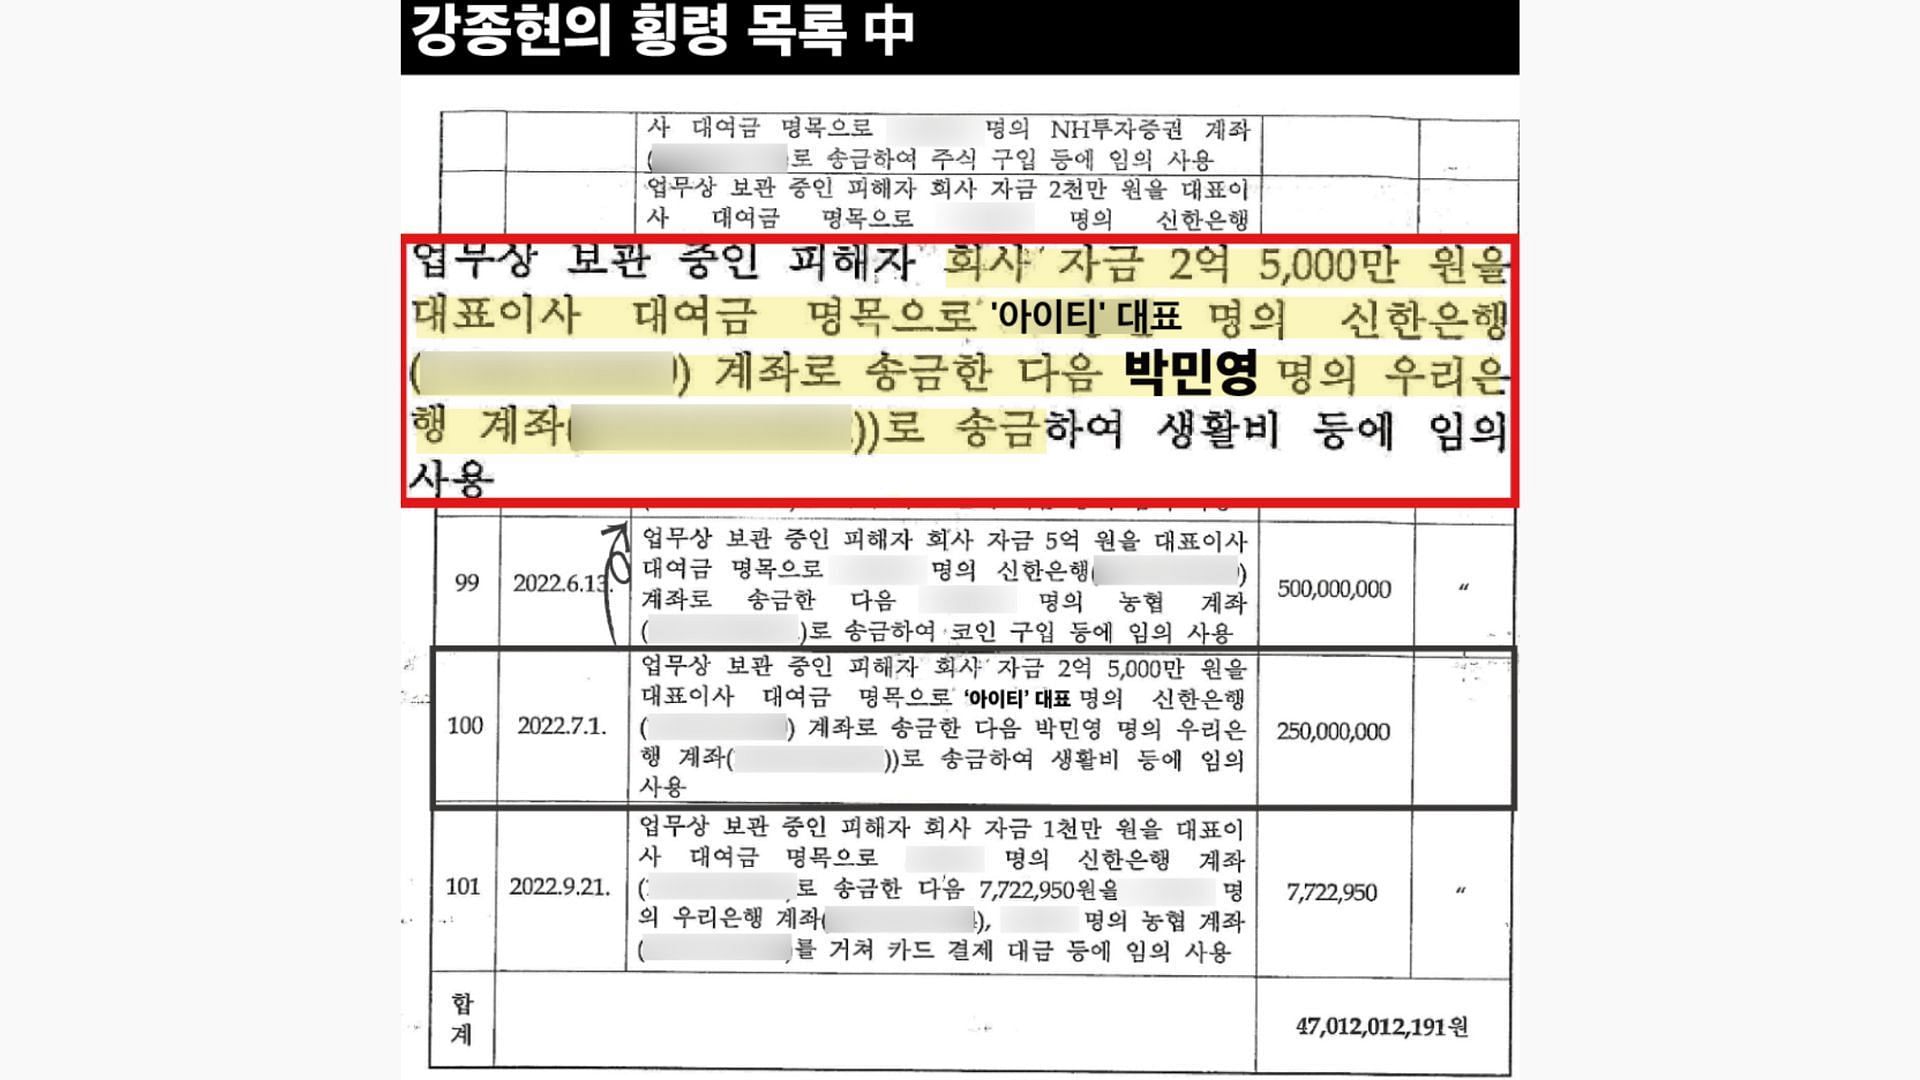 Alleged evidence by Dispatch on Min-young&#039;s bank account receiving money (Image via Dispatch)